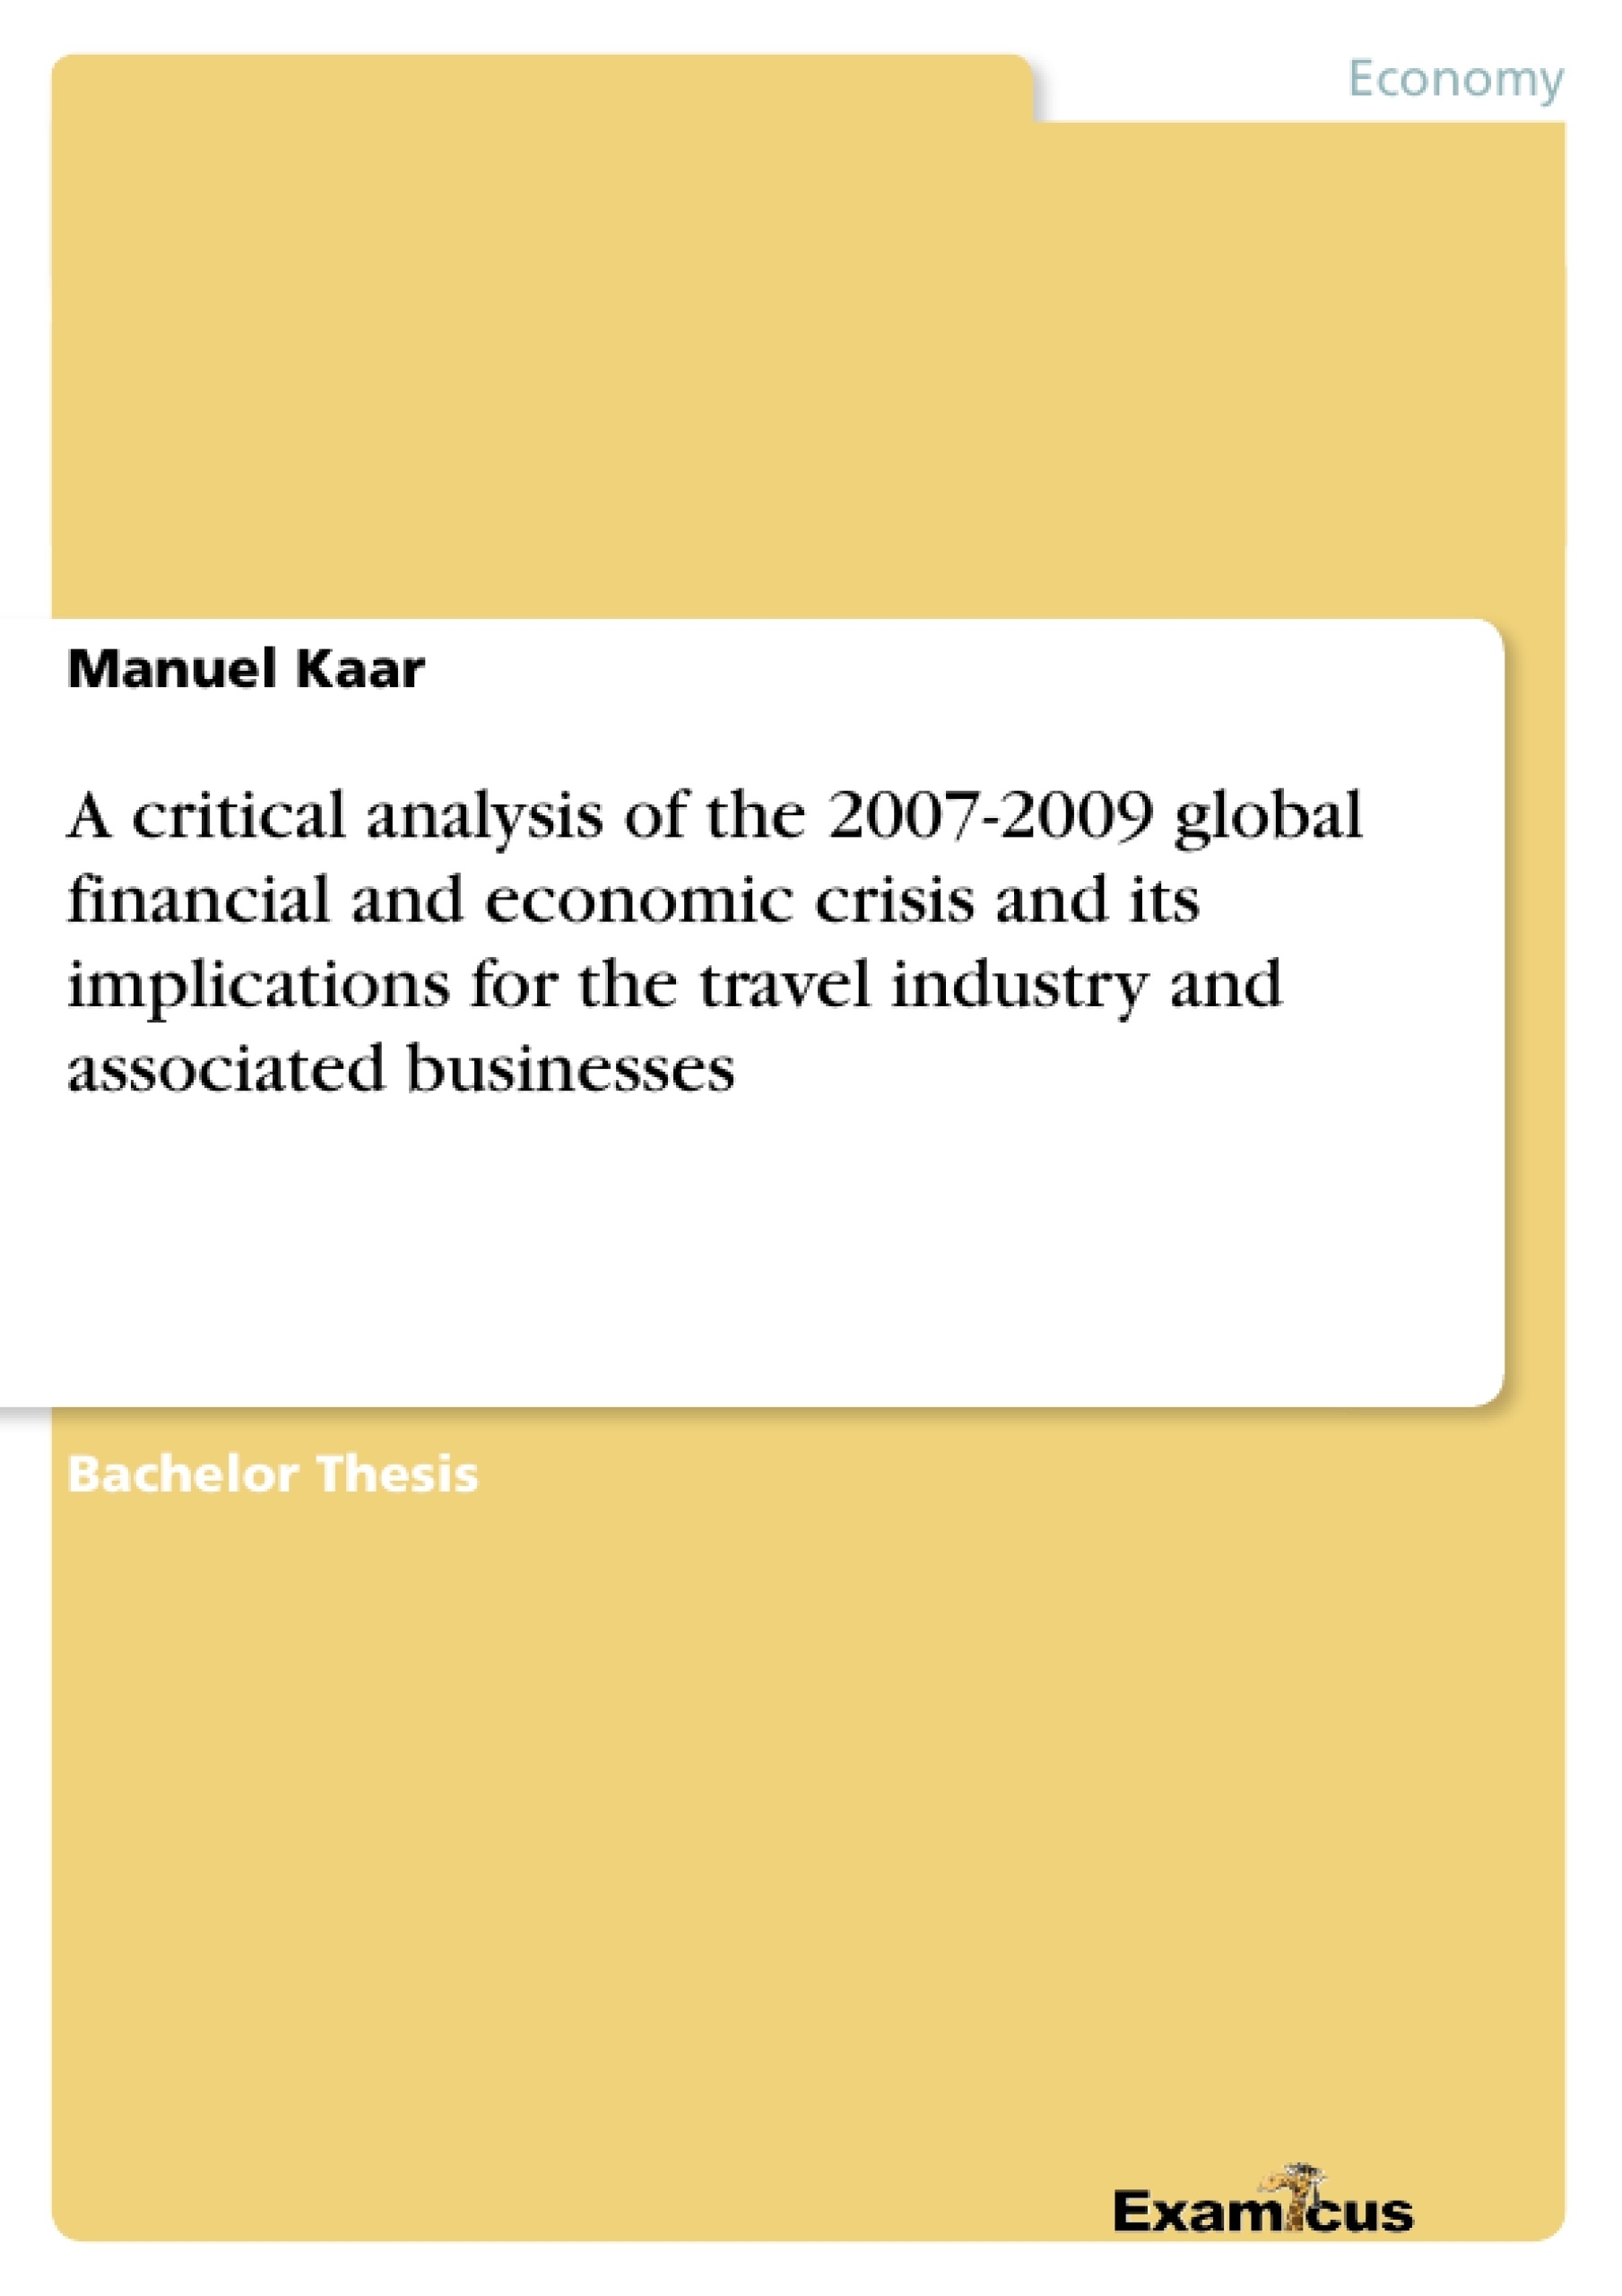 Título: A critical analysis of the 2007-2009 global financial and economic crisis and its implications for the travel industry and associated businesses